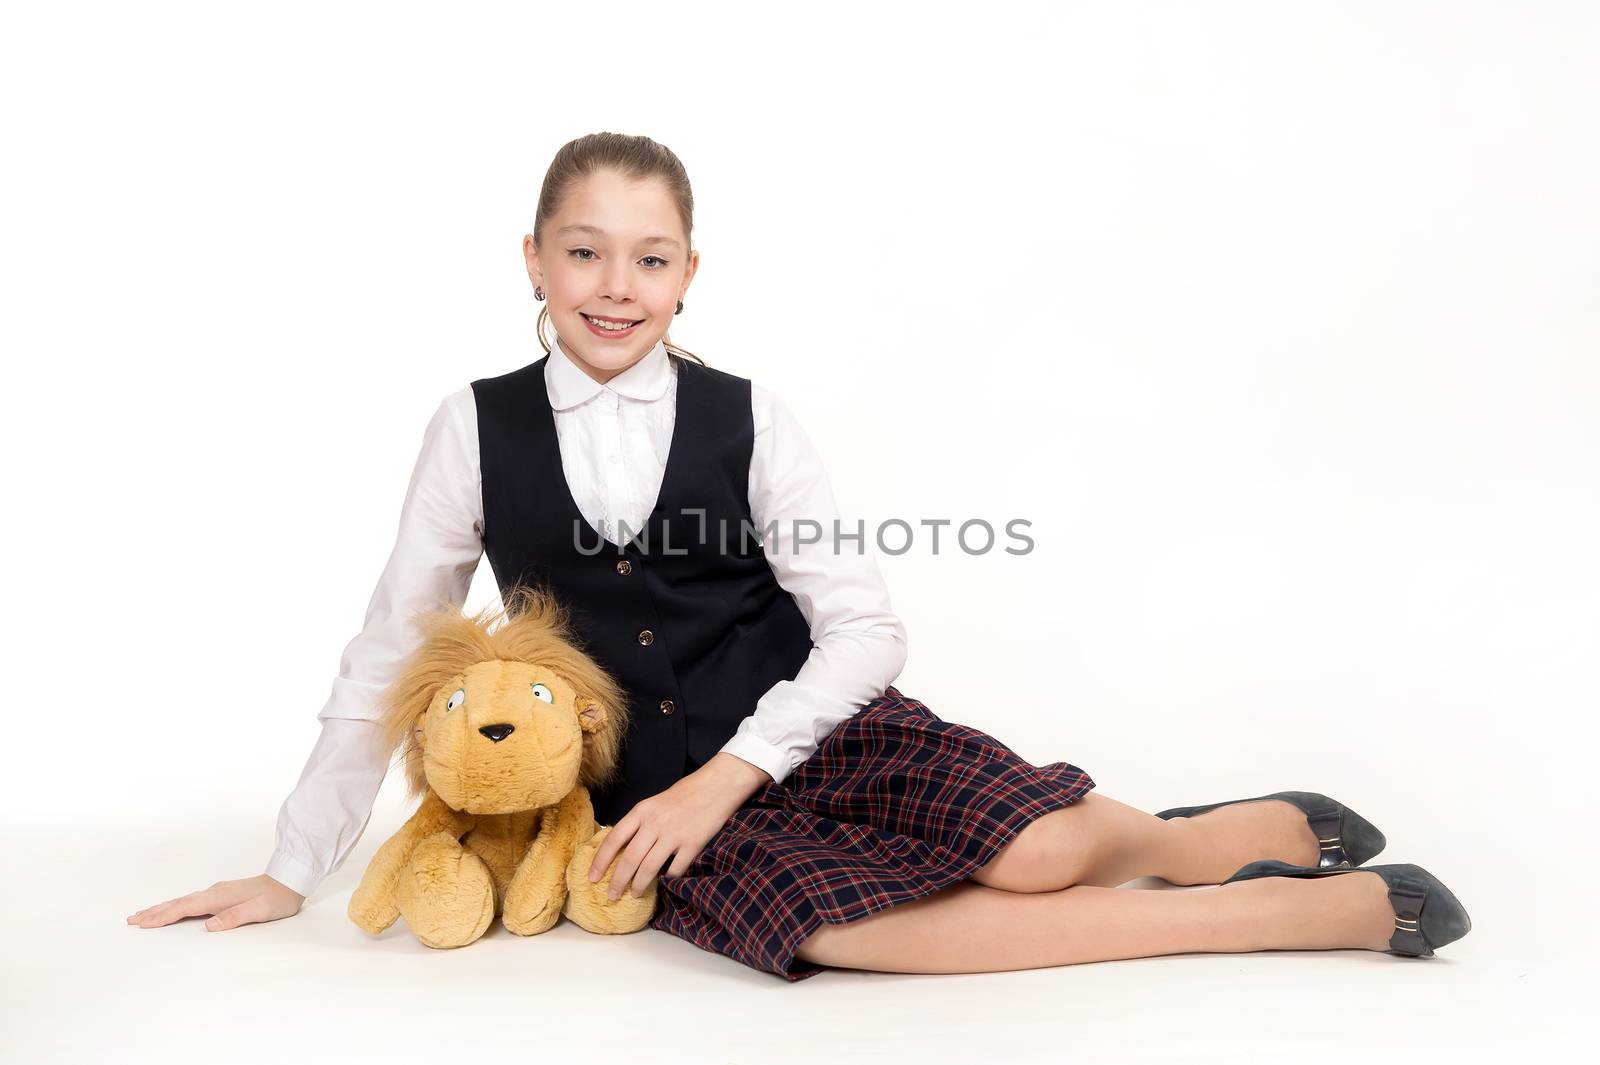 The beautiful schoolgirl sits in a school uniform and holds a toy on a white background